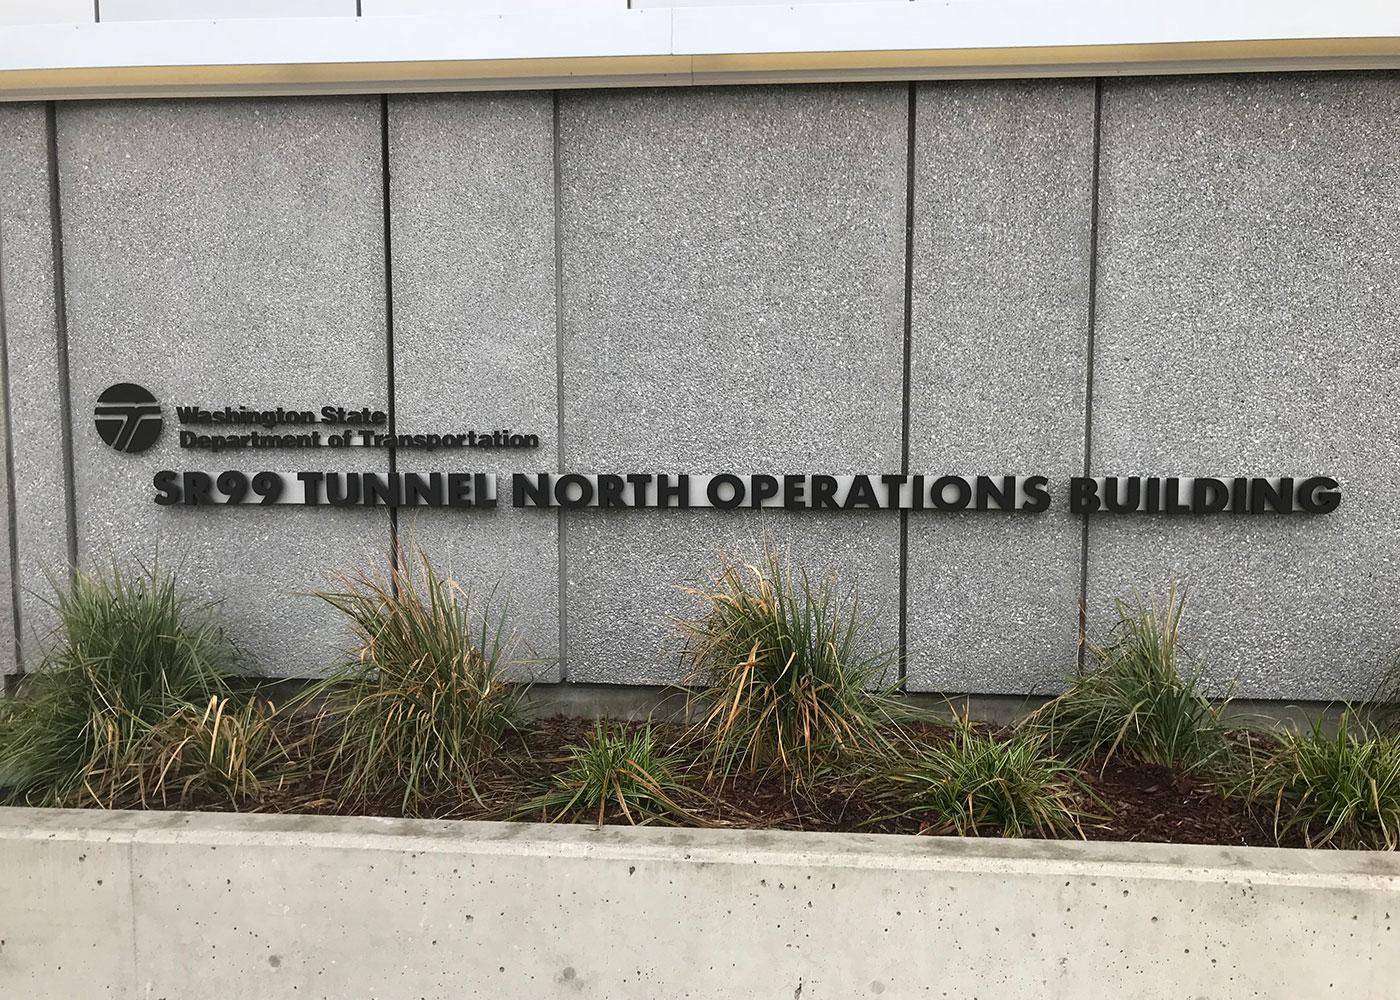 North and South Operations Buildings received cast aluminum letters and the WSDOT logo finished with dark bronze anodized effect mounted to an aluminum bar flush to the building.